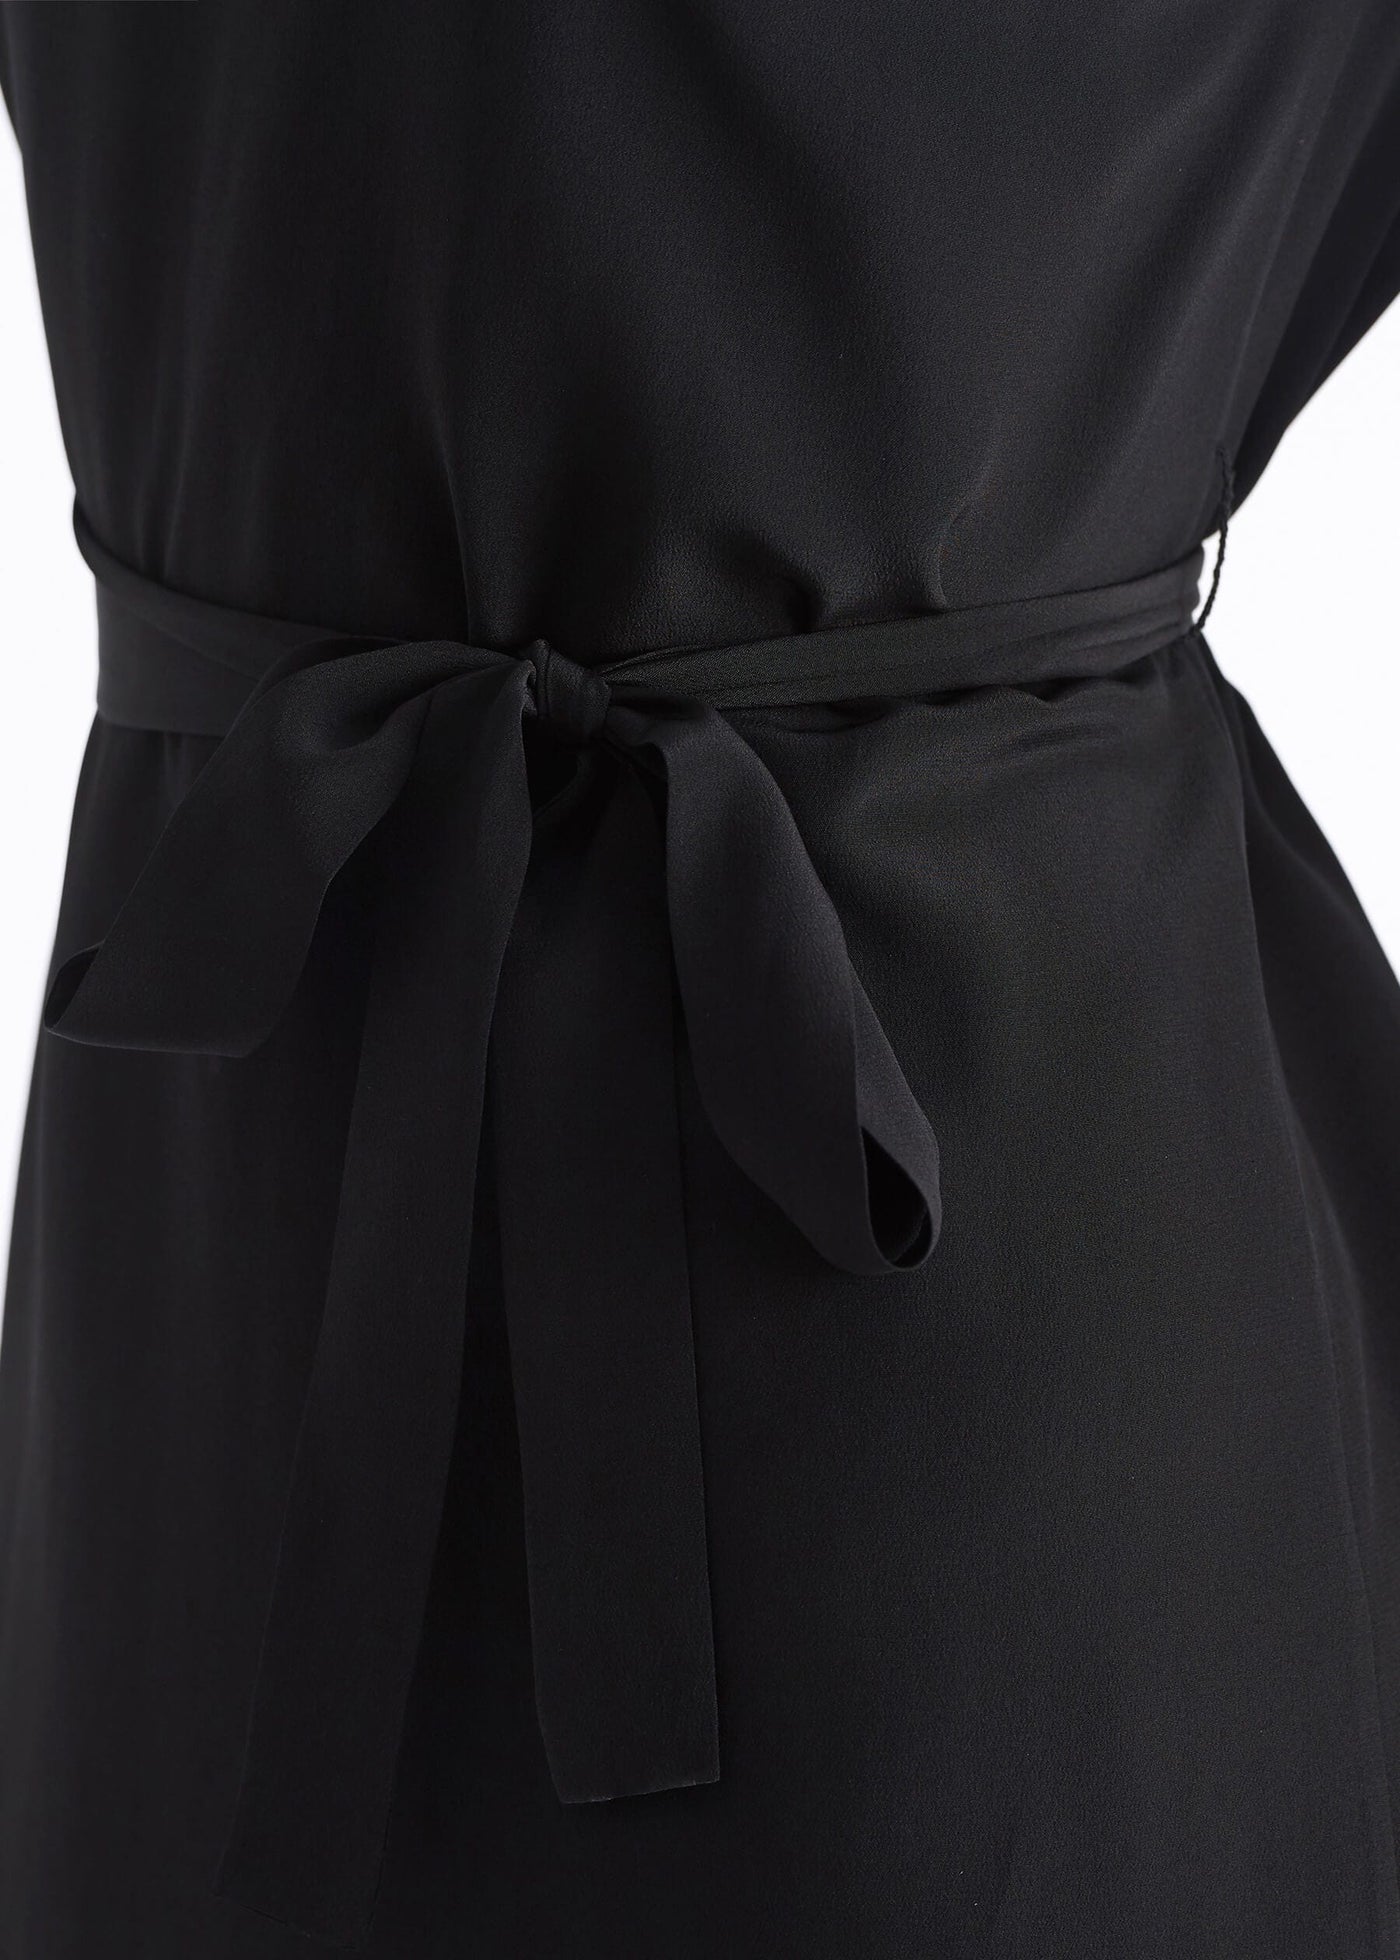 Basic Silk LBD Wearable Front and Back Black LILYSILK Factory